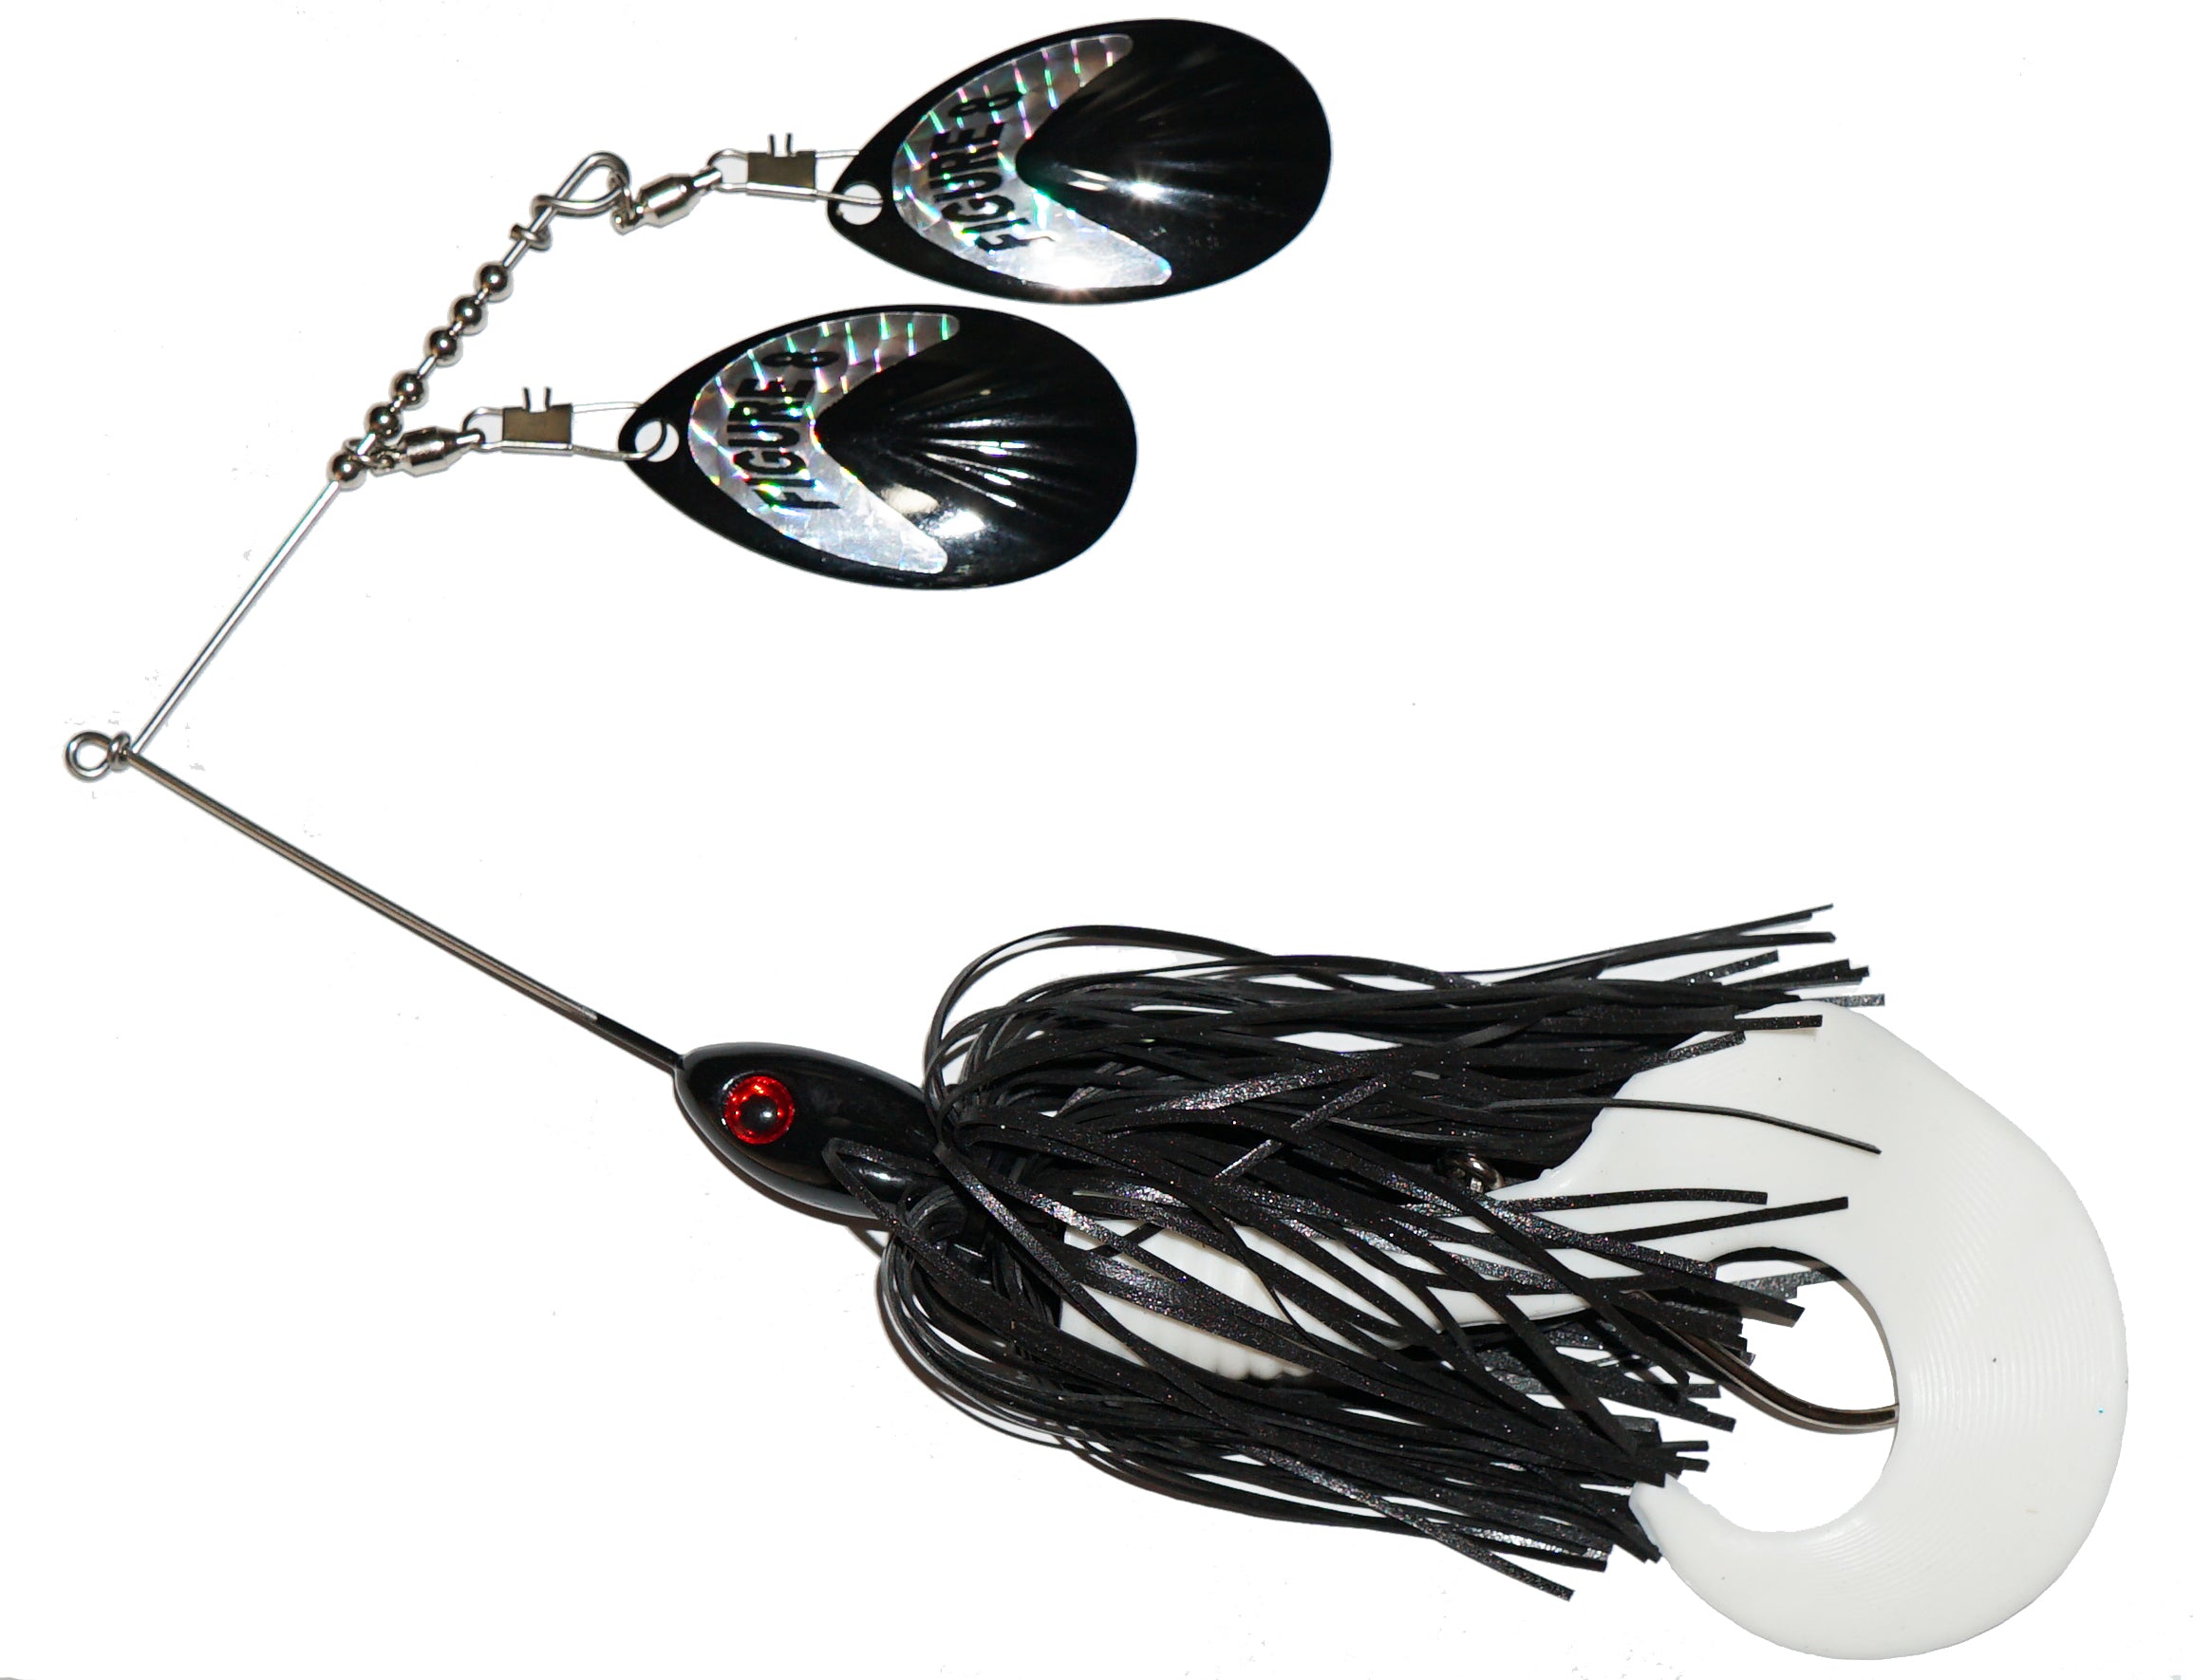 Figure 8 The Bomb Spinnerbait Cotton Candy